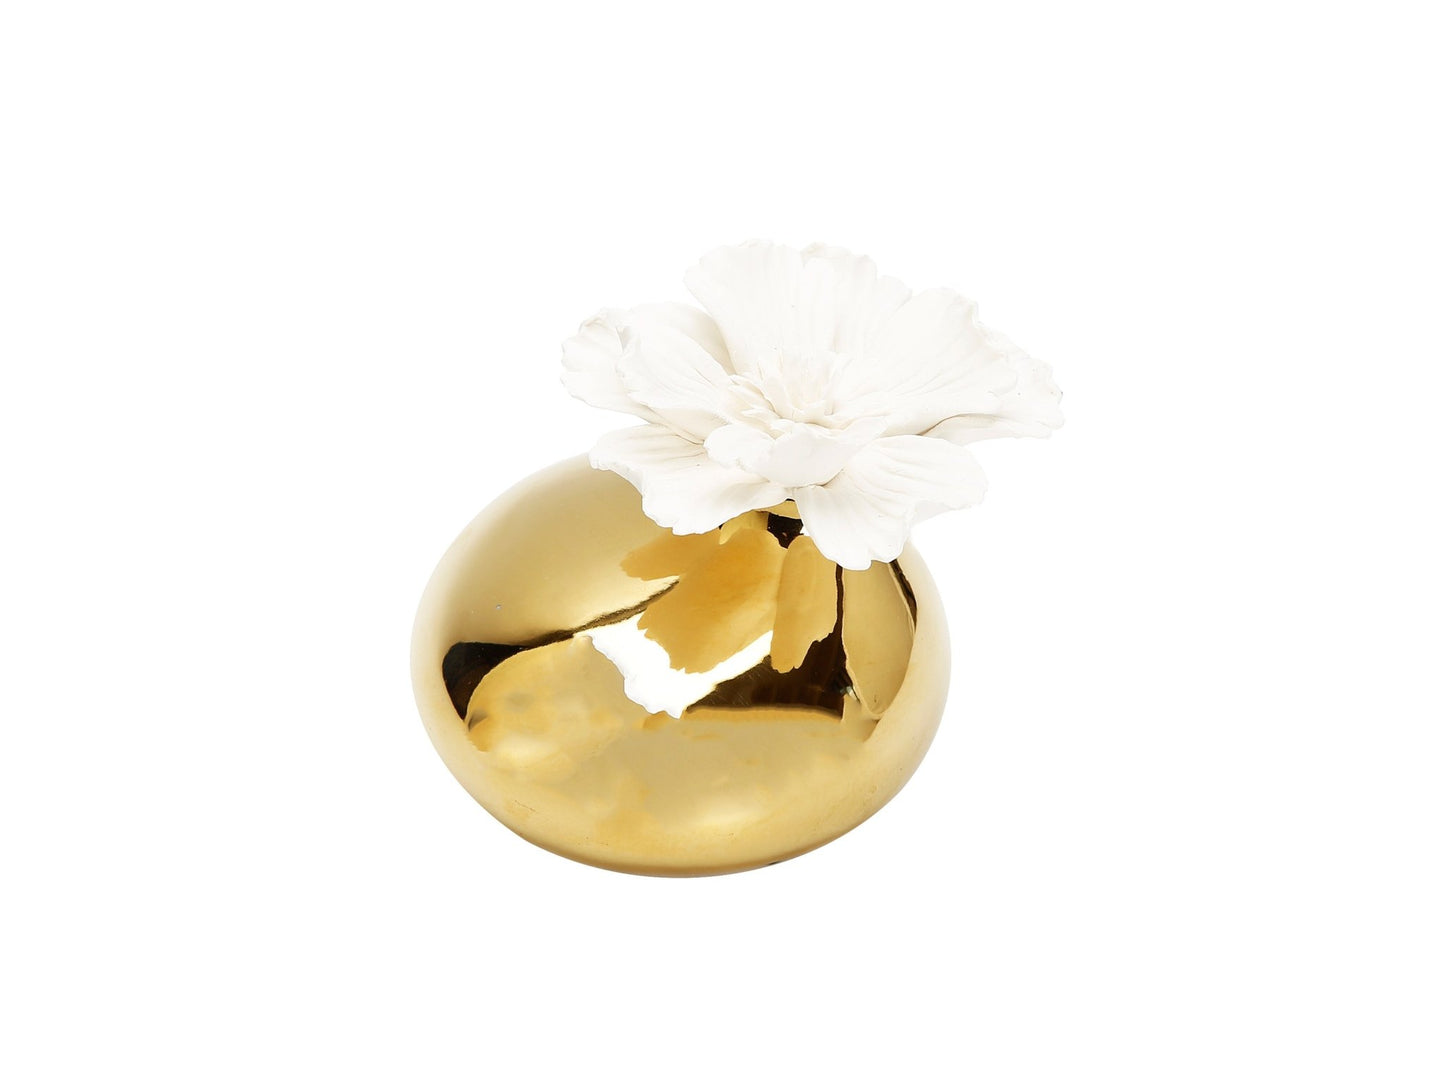 Gold Diffuser with Dimensional White Flower, “Iris and Rose” aroma - HOUSE OF SHE